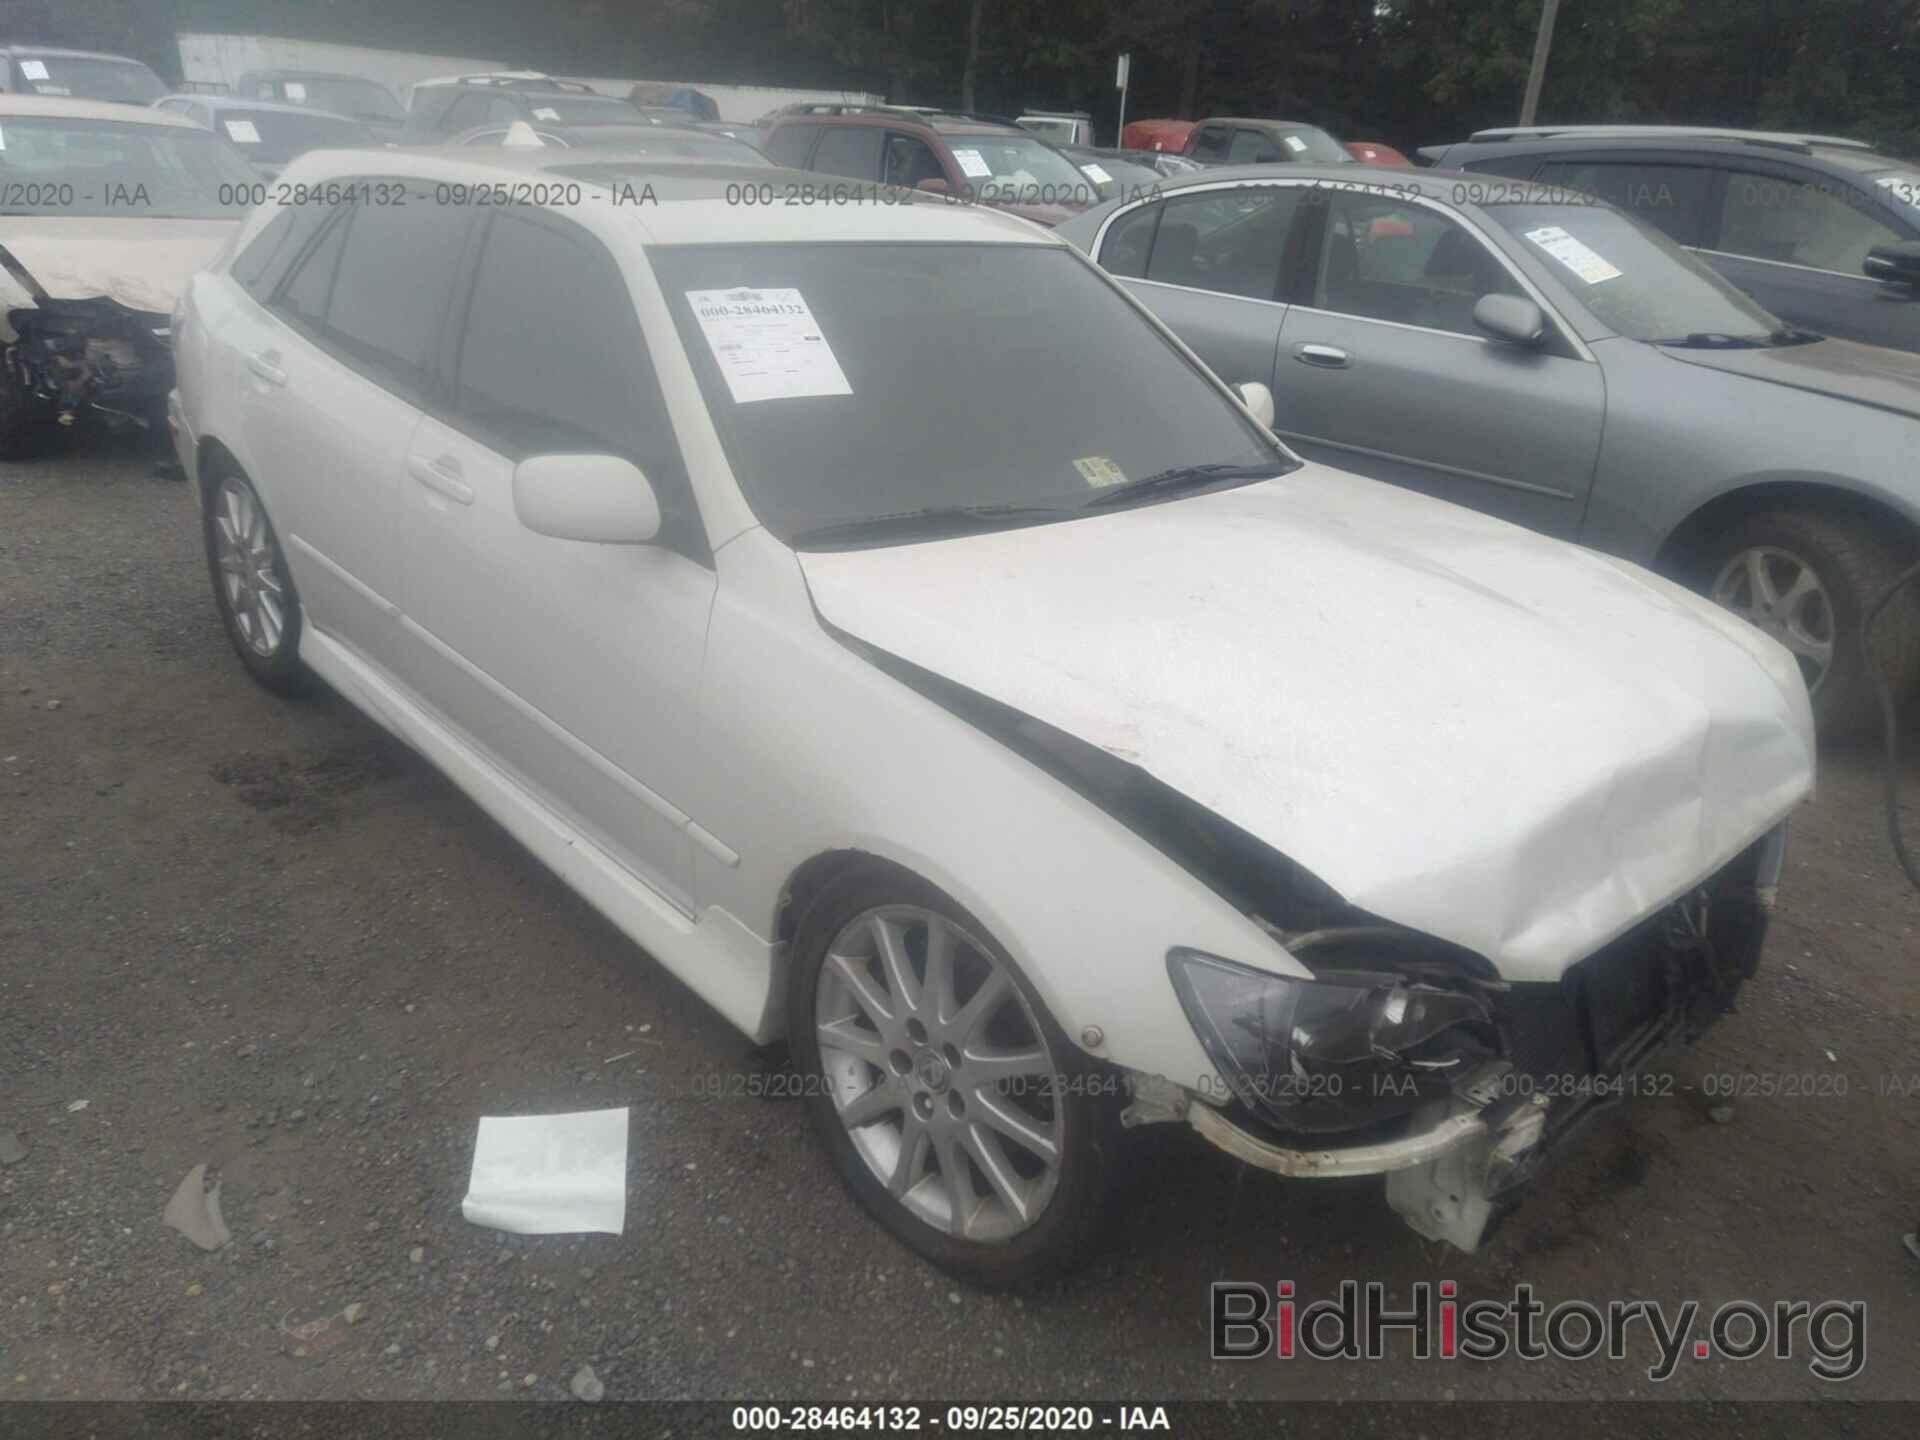 Photo JTHED192020042965 - LEXUS IS 300 2002